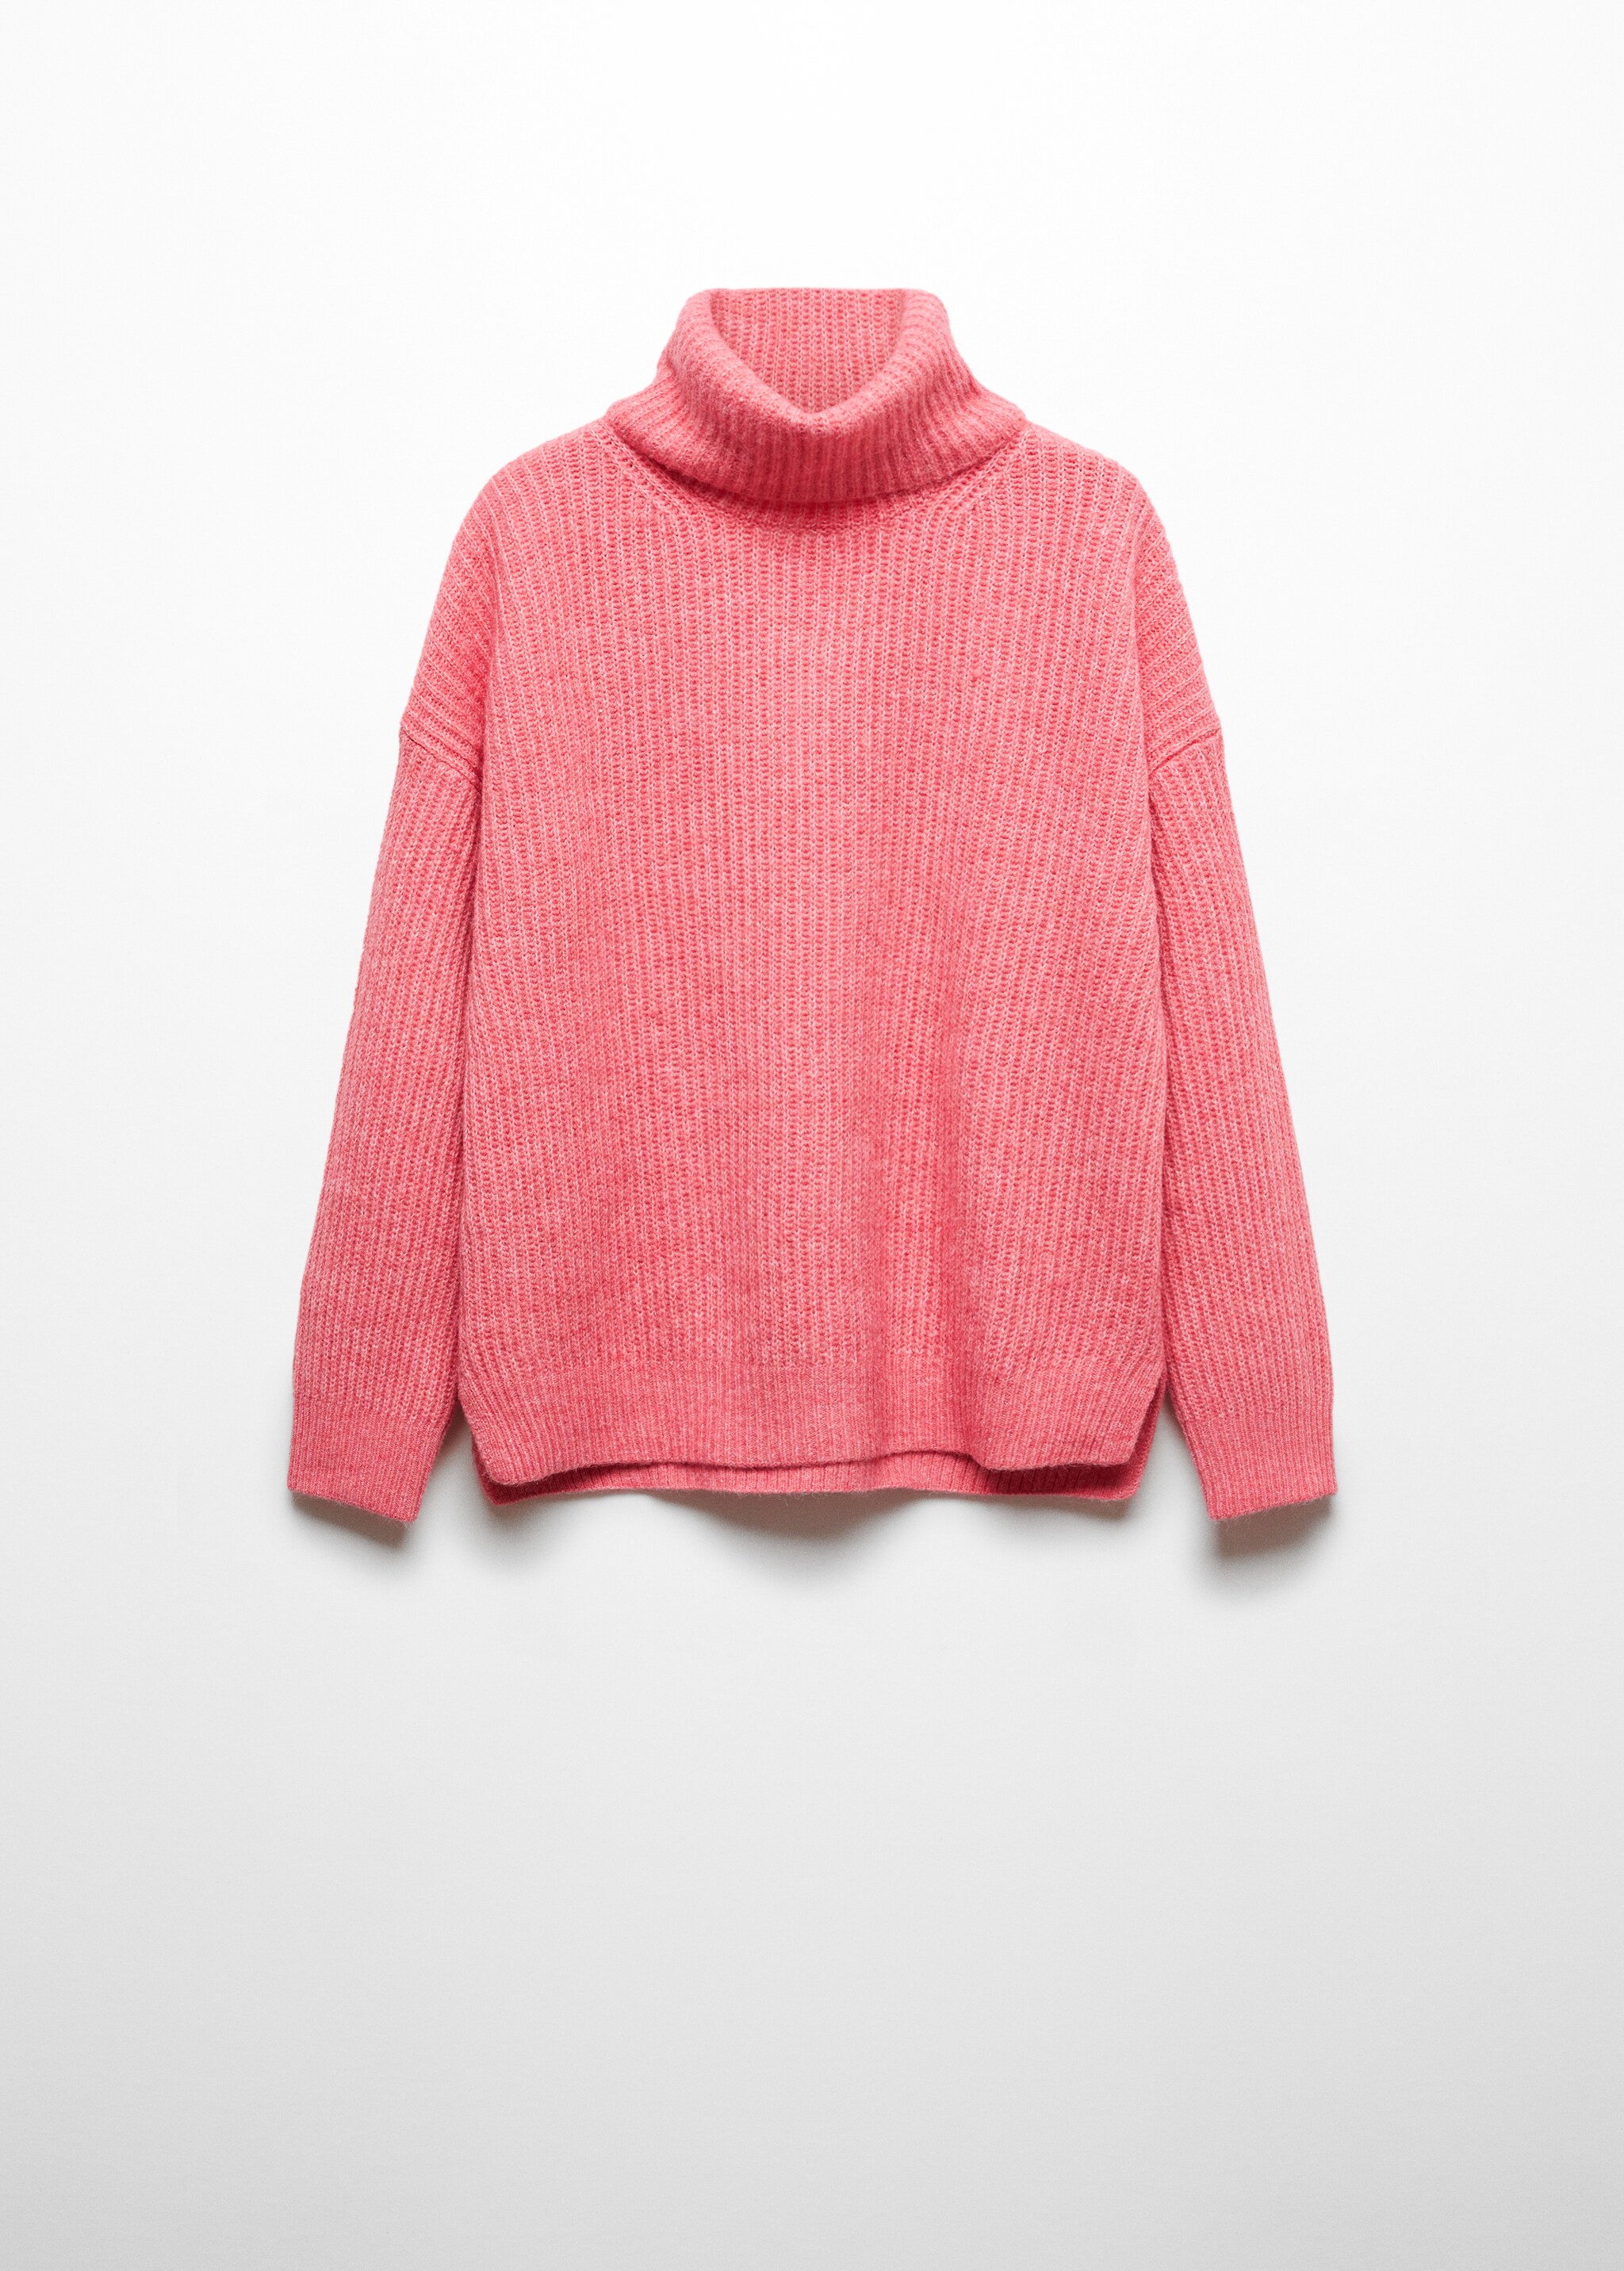 Rolled neck cable sweater - Article without model